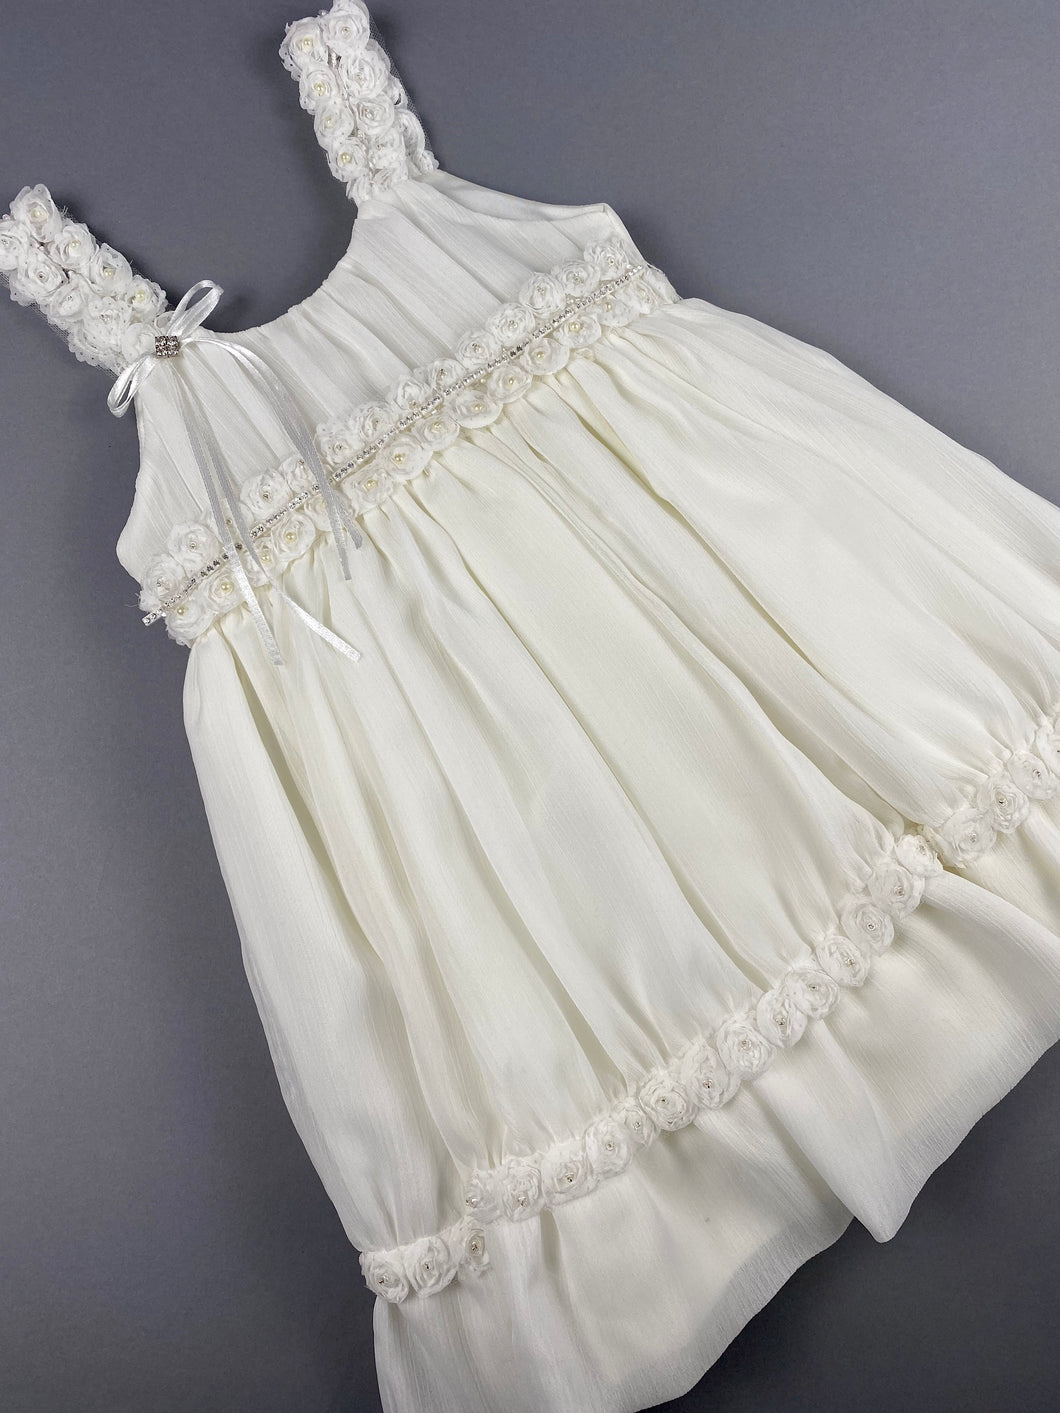 Dress 35 Girls Baptismal Christening Sleeveless  3pc  Dress, matching Bolero and Hat. Made in Greece exclusively for Rosies Collections.